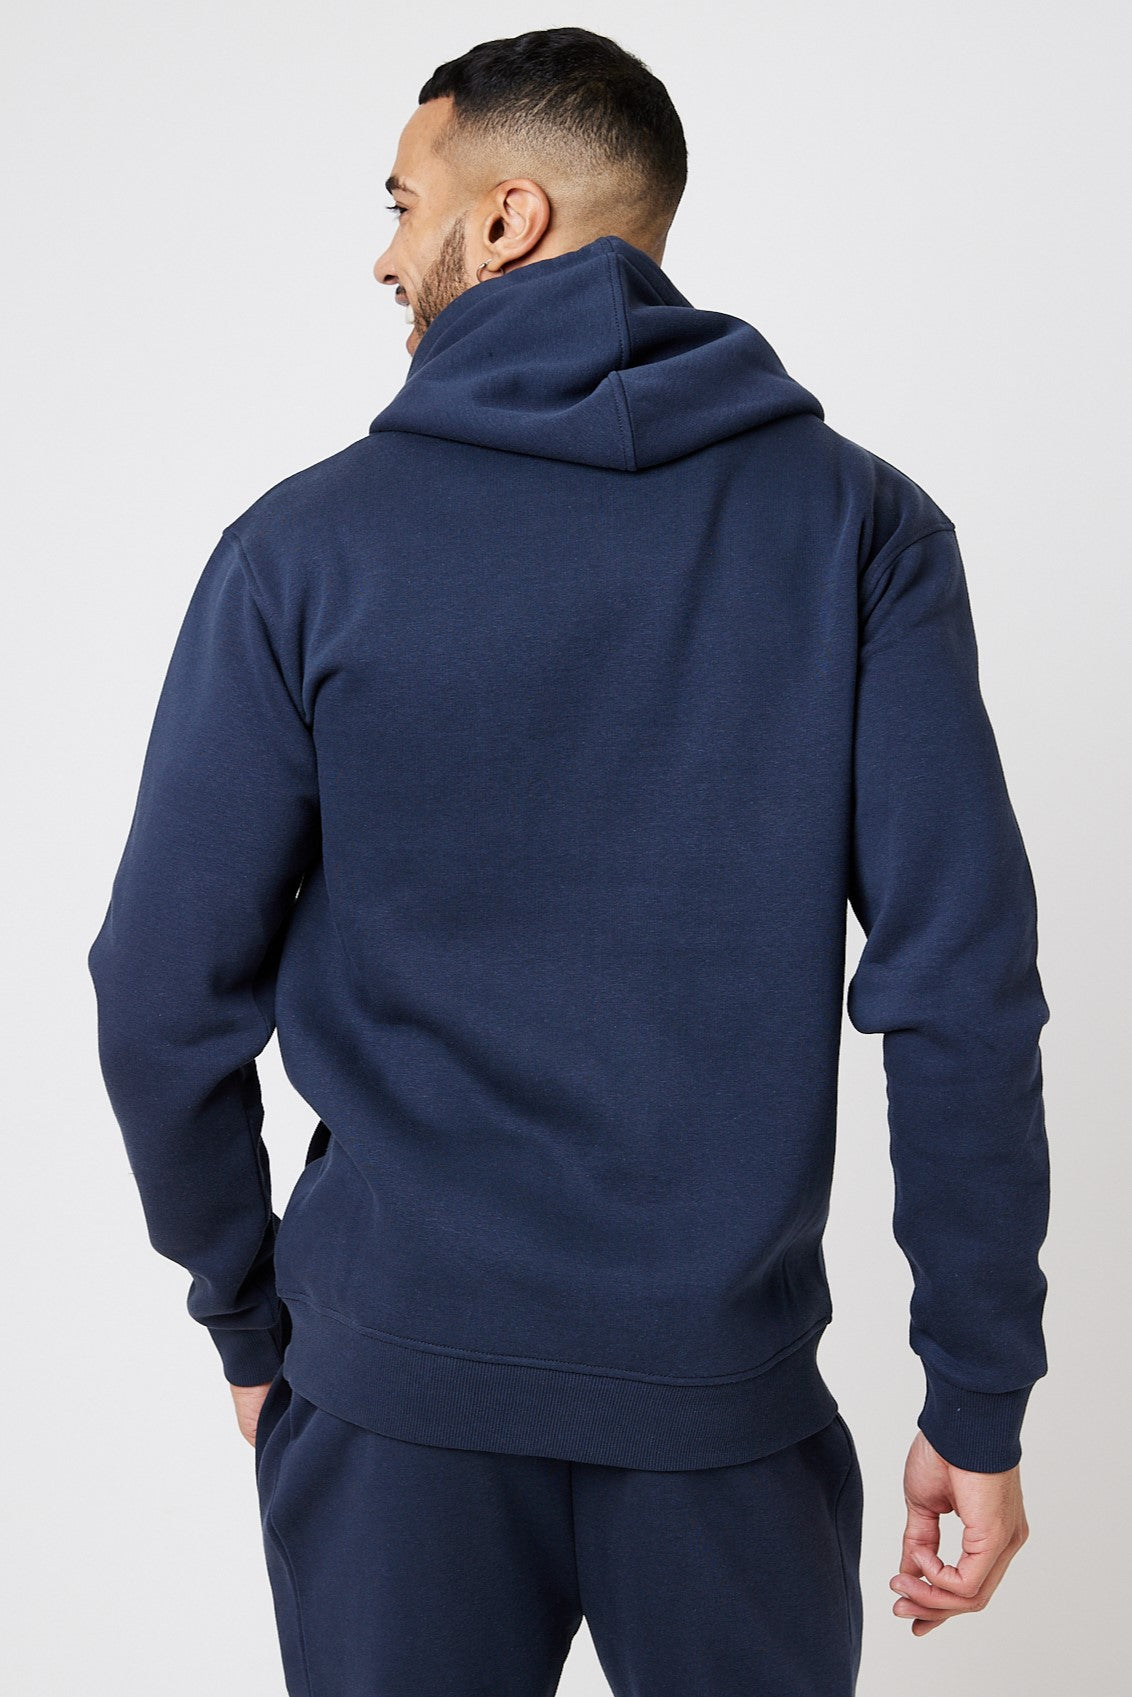 Holloway Road Over the Head Hoody Tracksuit- Navy